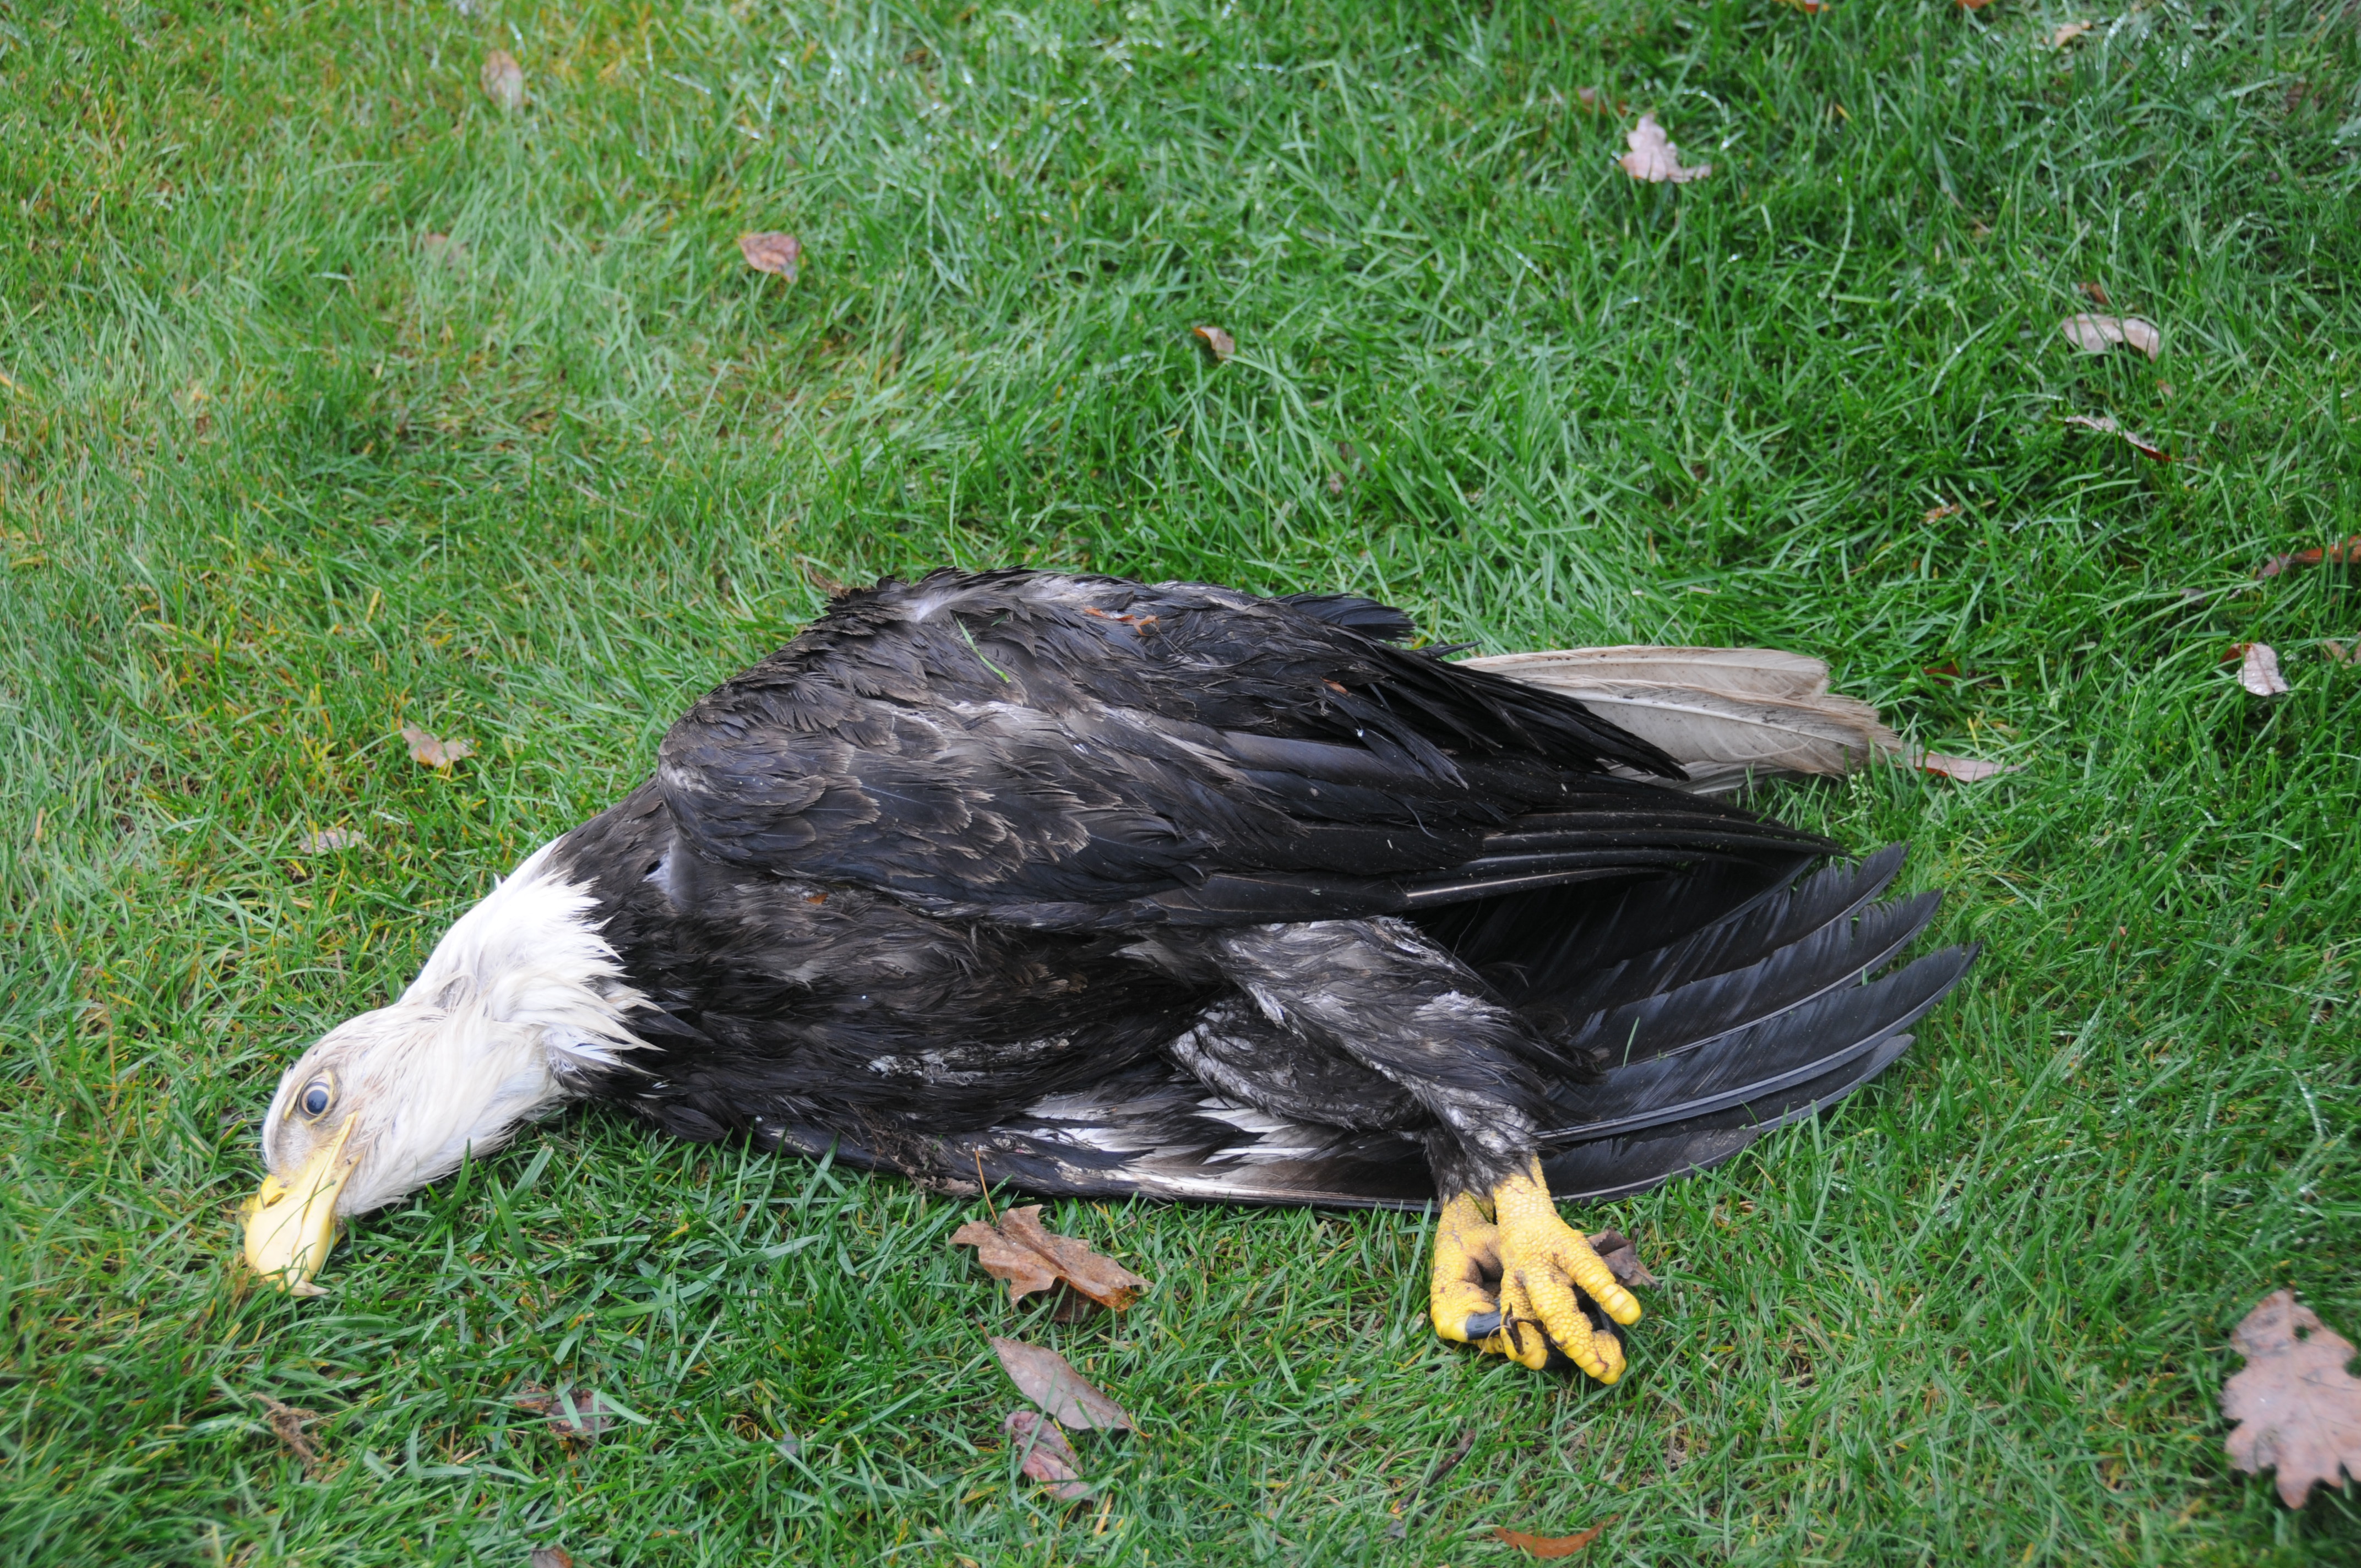 A bald eagle who died from lead poisoning lying on the ground